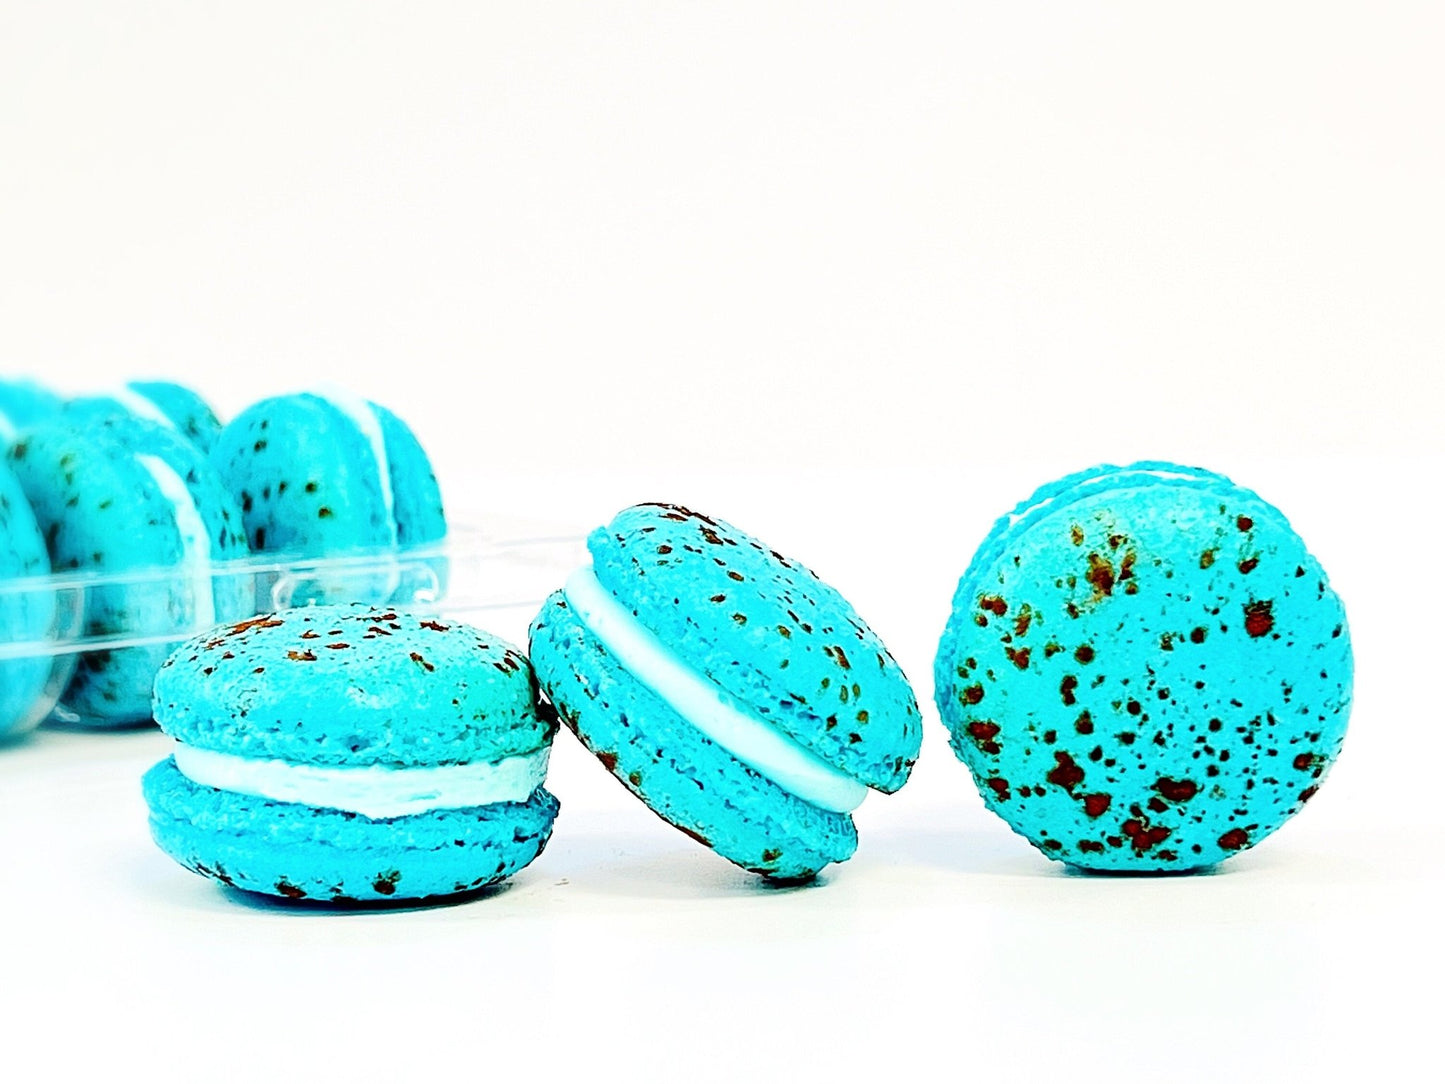 50 Pack blue raspberry and white chocolate French macaron value pack - Macaron Centrale